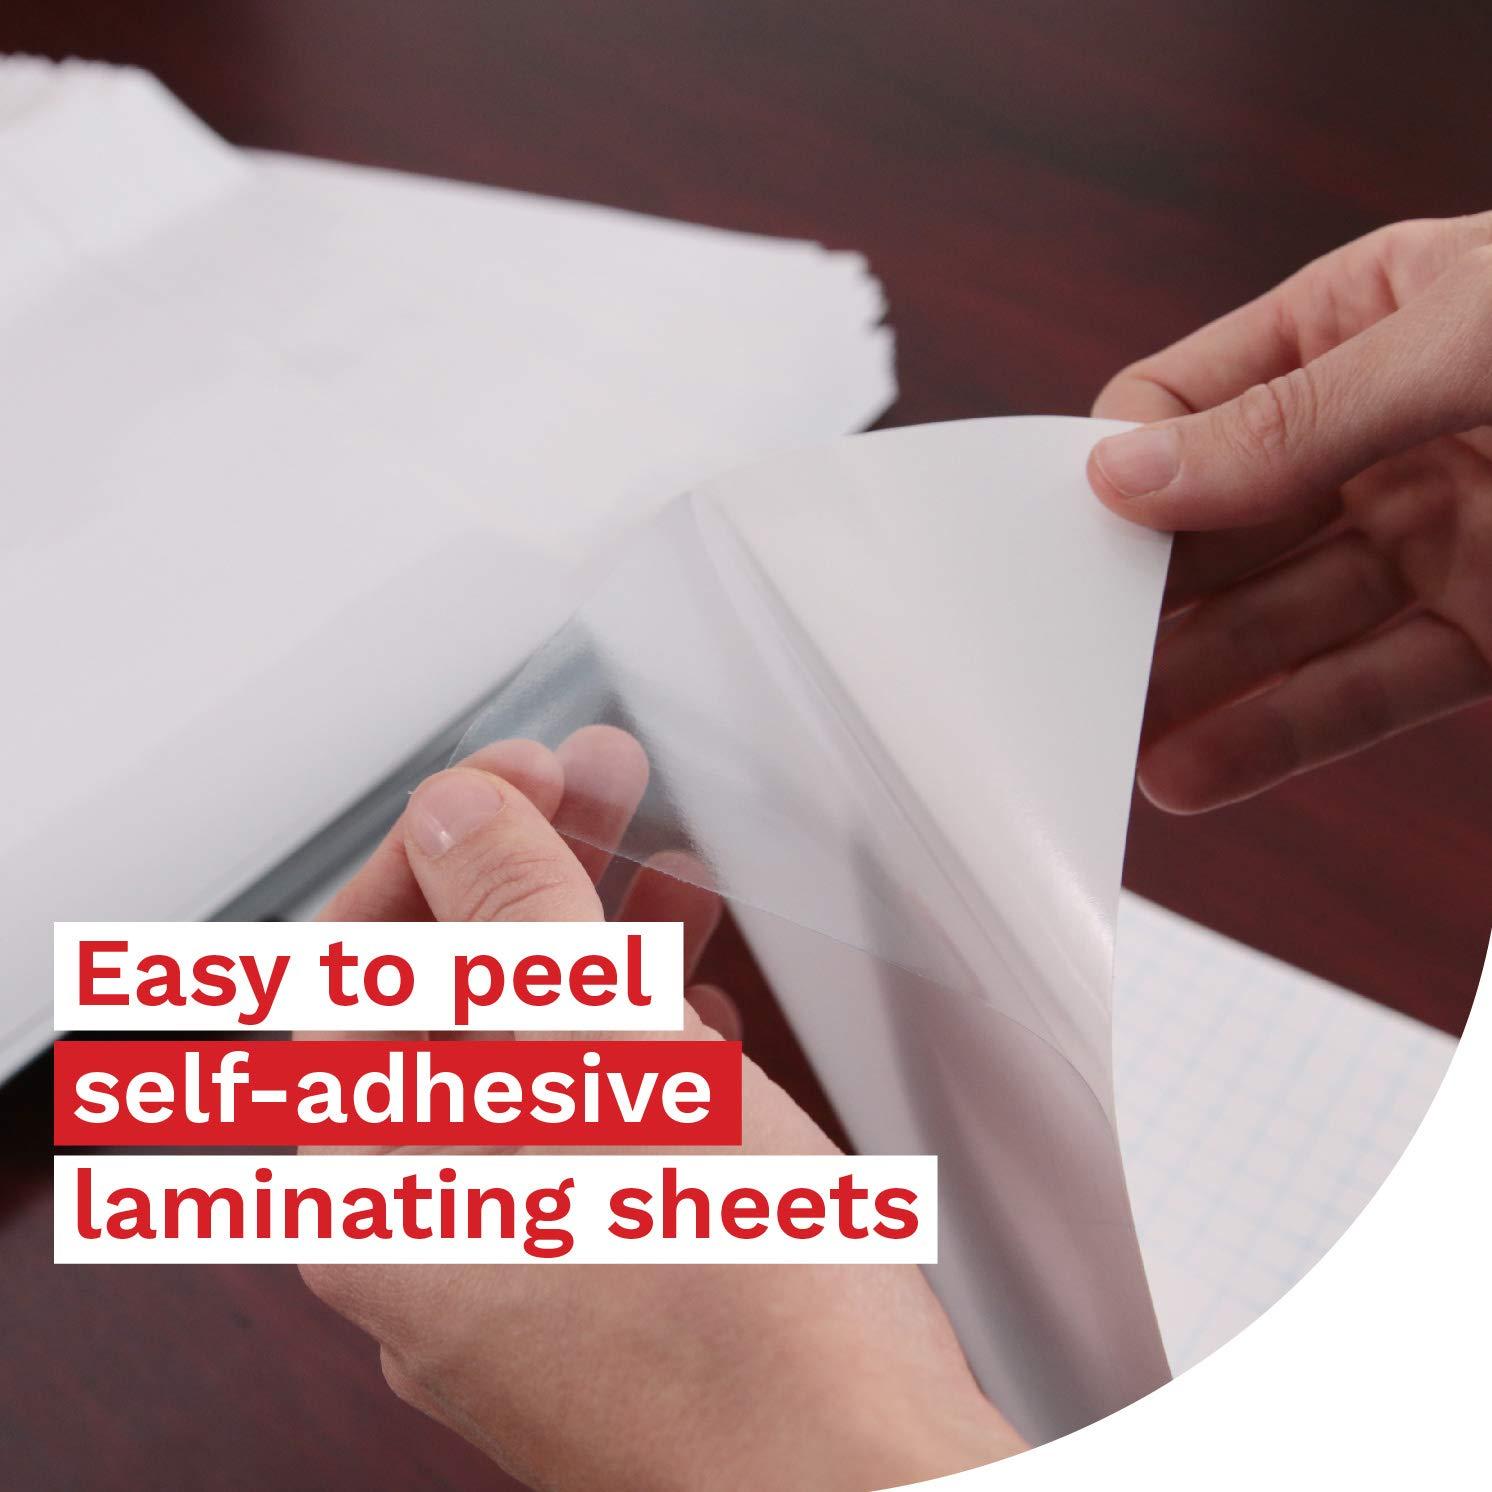 XFasten Self-Adhesive Laminating Sheets, 9 x 12 Inches (100-Pack)